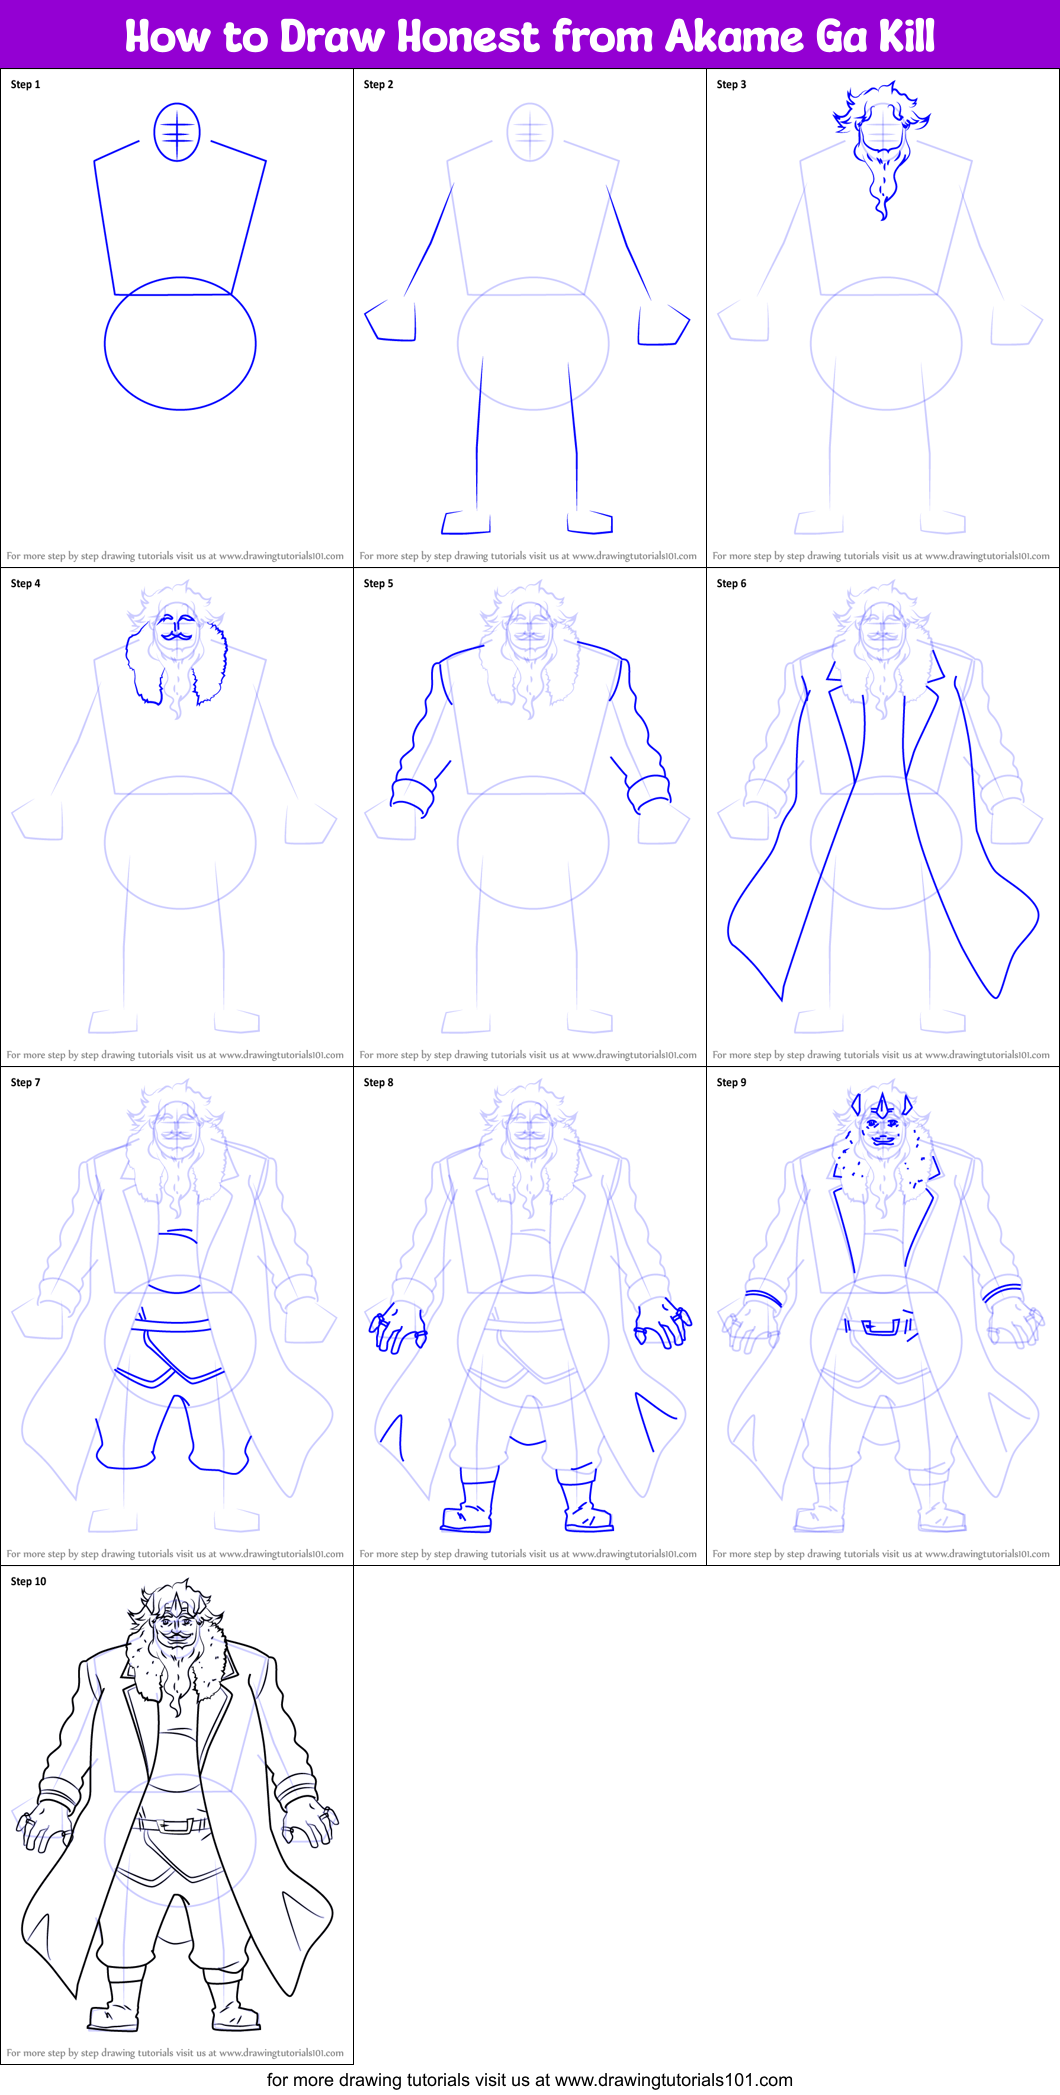 How to Draw Honest from Akame Ga Kill printable step by step drawing